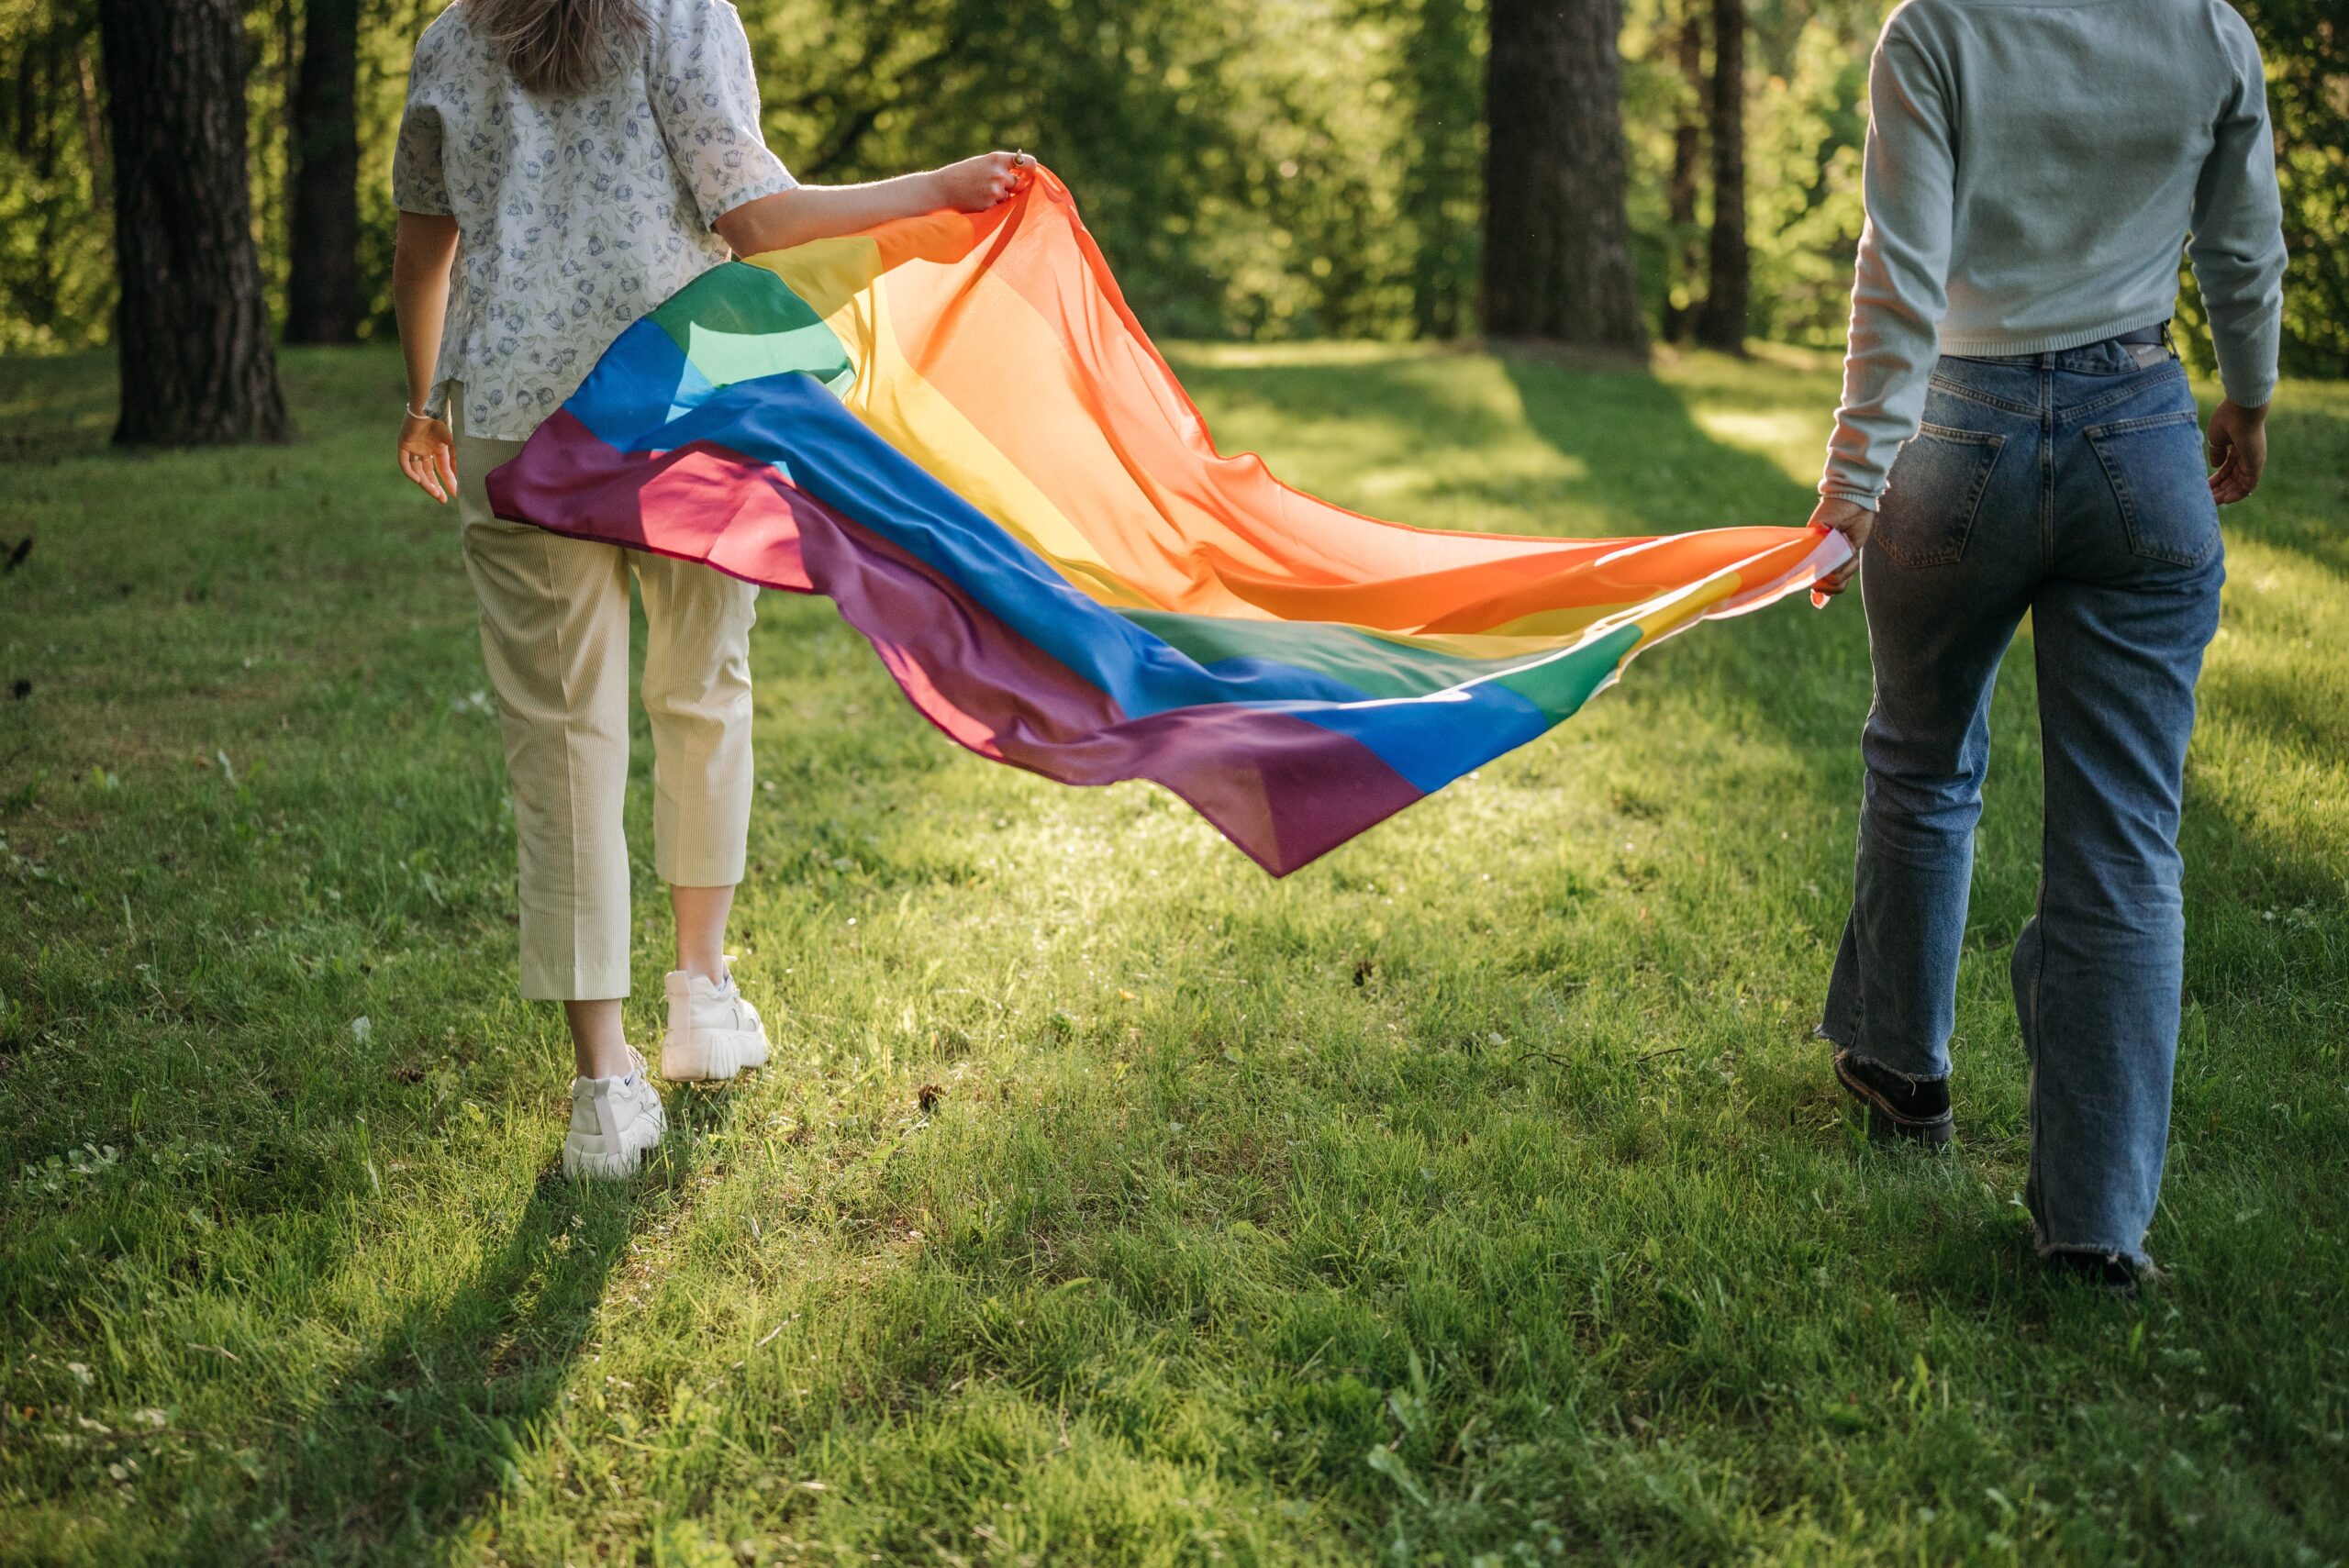 two people holding a pride flag